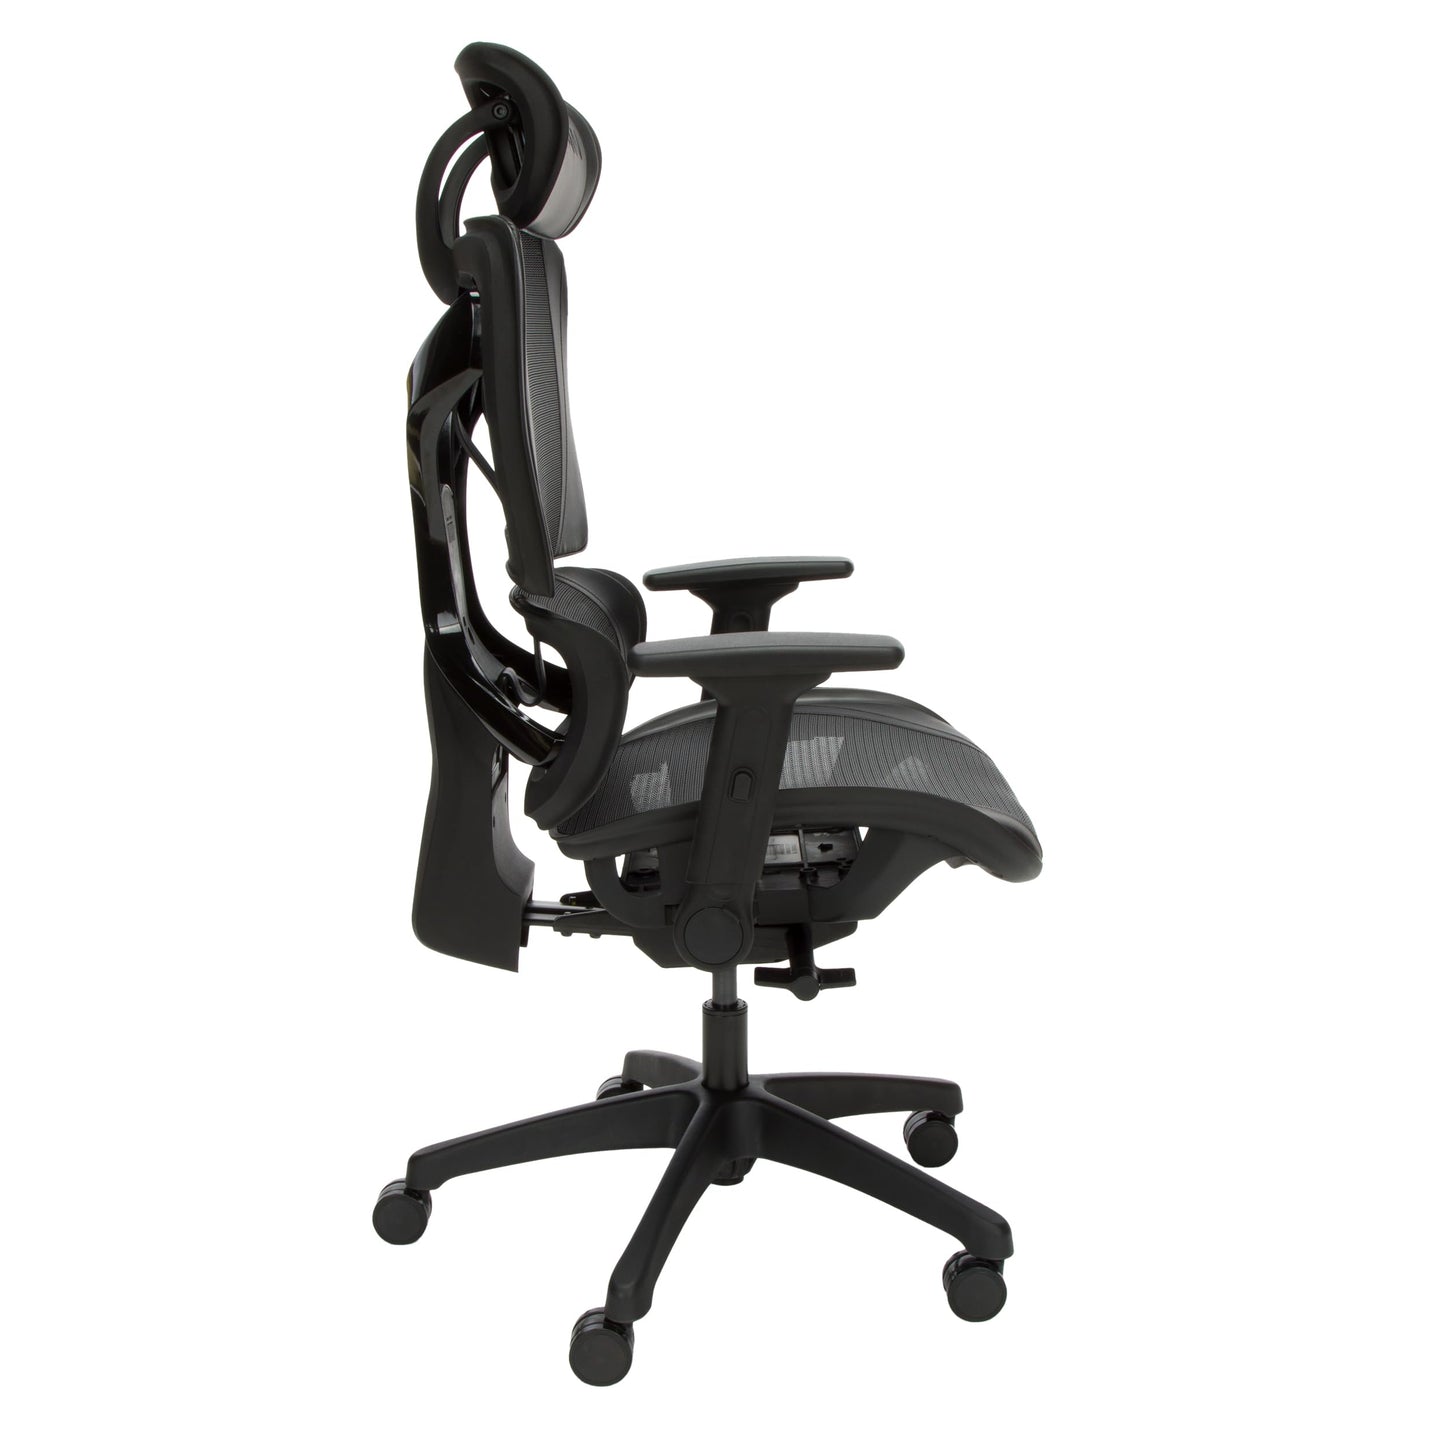 RESPAWN Specter Gaming Chair Ergonomic Office Chair for The Home Office Gamer - Cooling Mesh Computer Desk Chair with Active Lumbar Support, Flip Back Arms, Seat Slide & Tilt Recline - Black